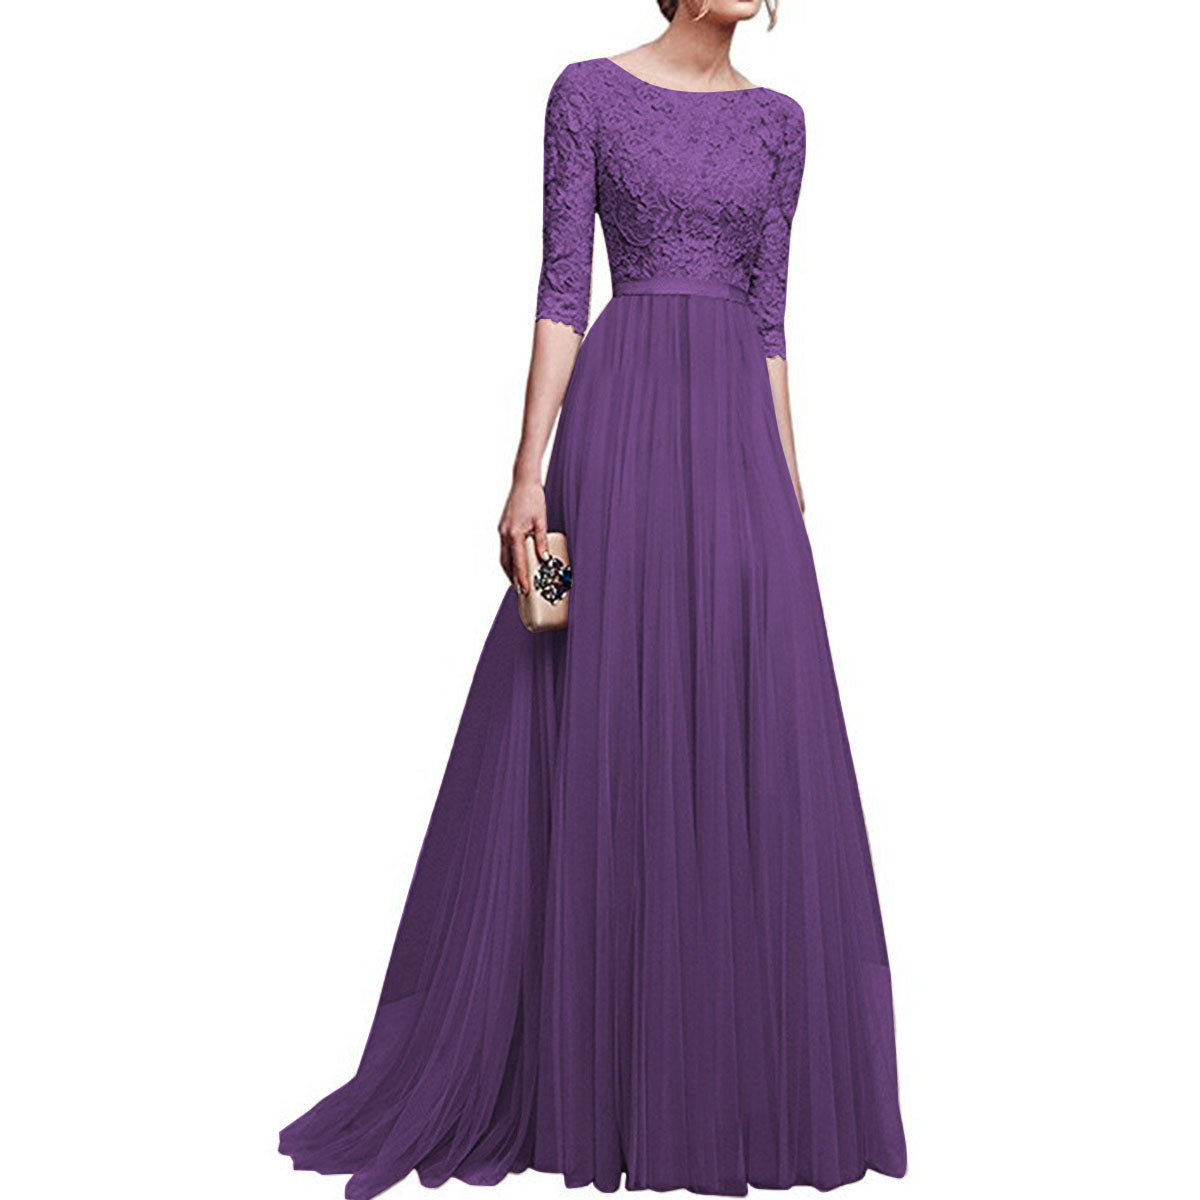 Lace Patchwork Half Sleeves Long Party Dress